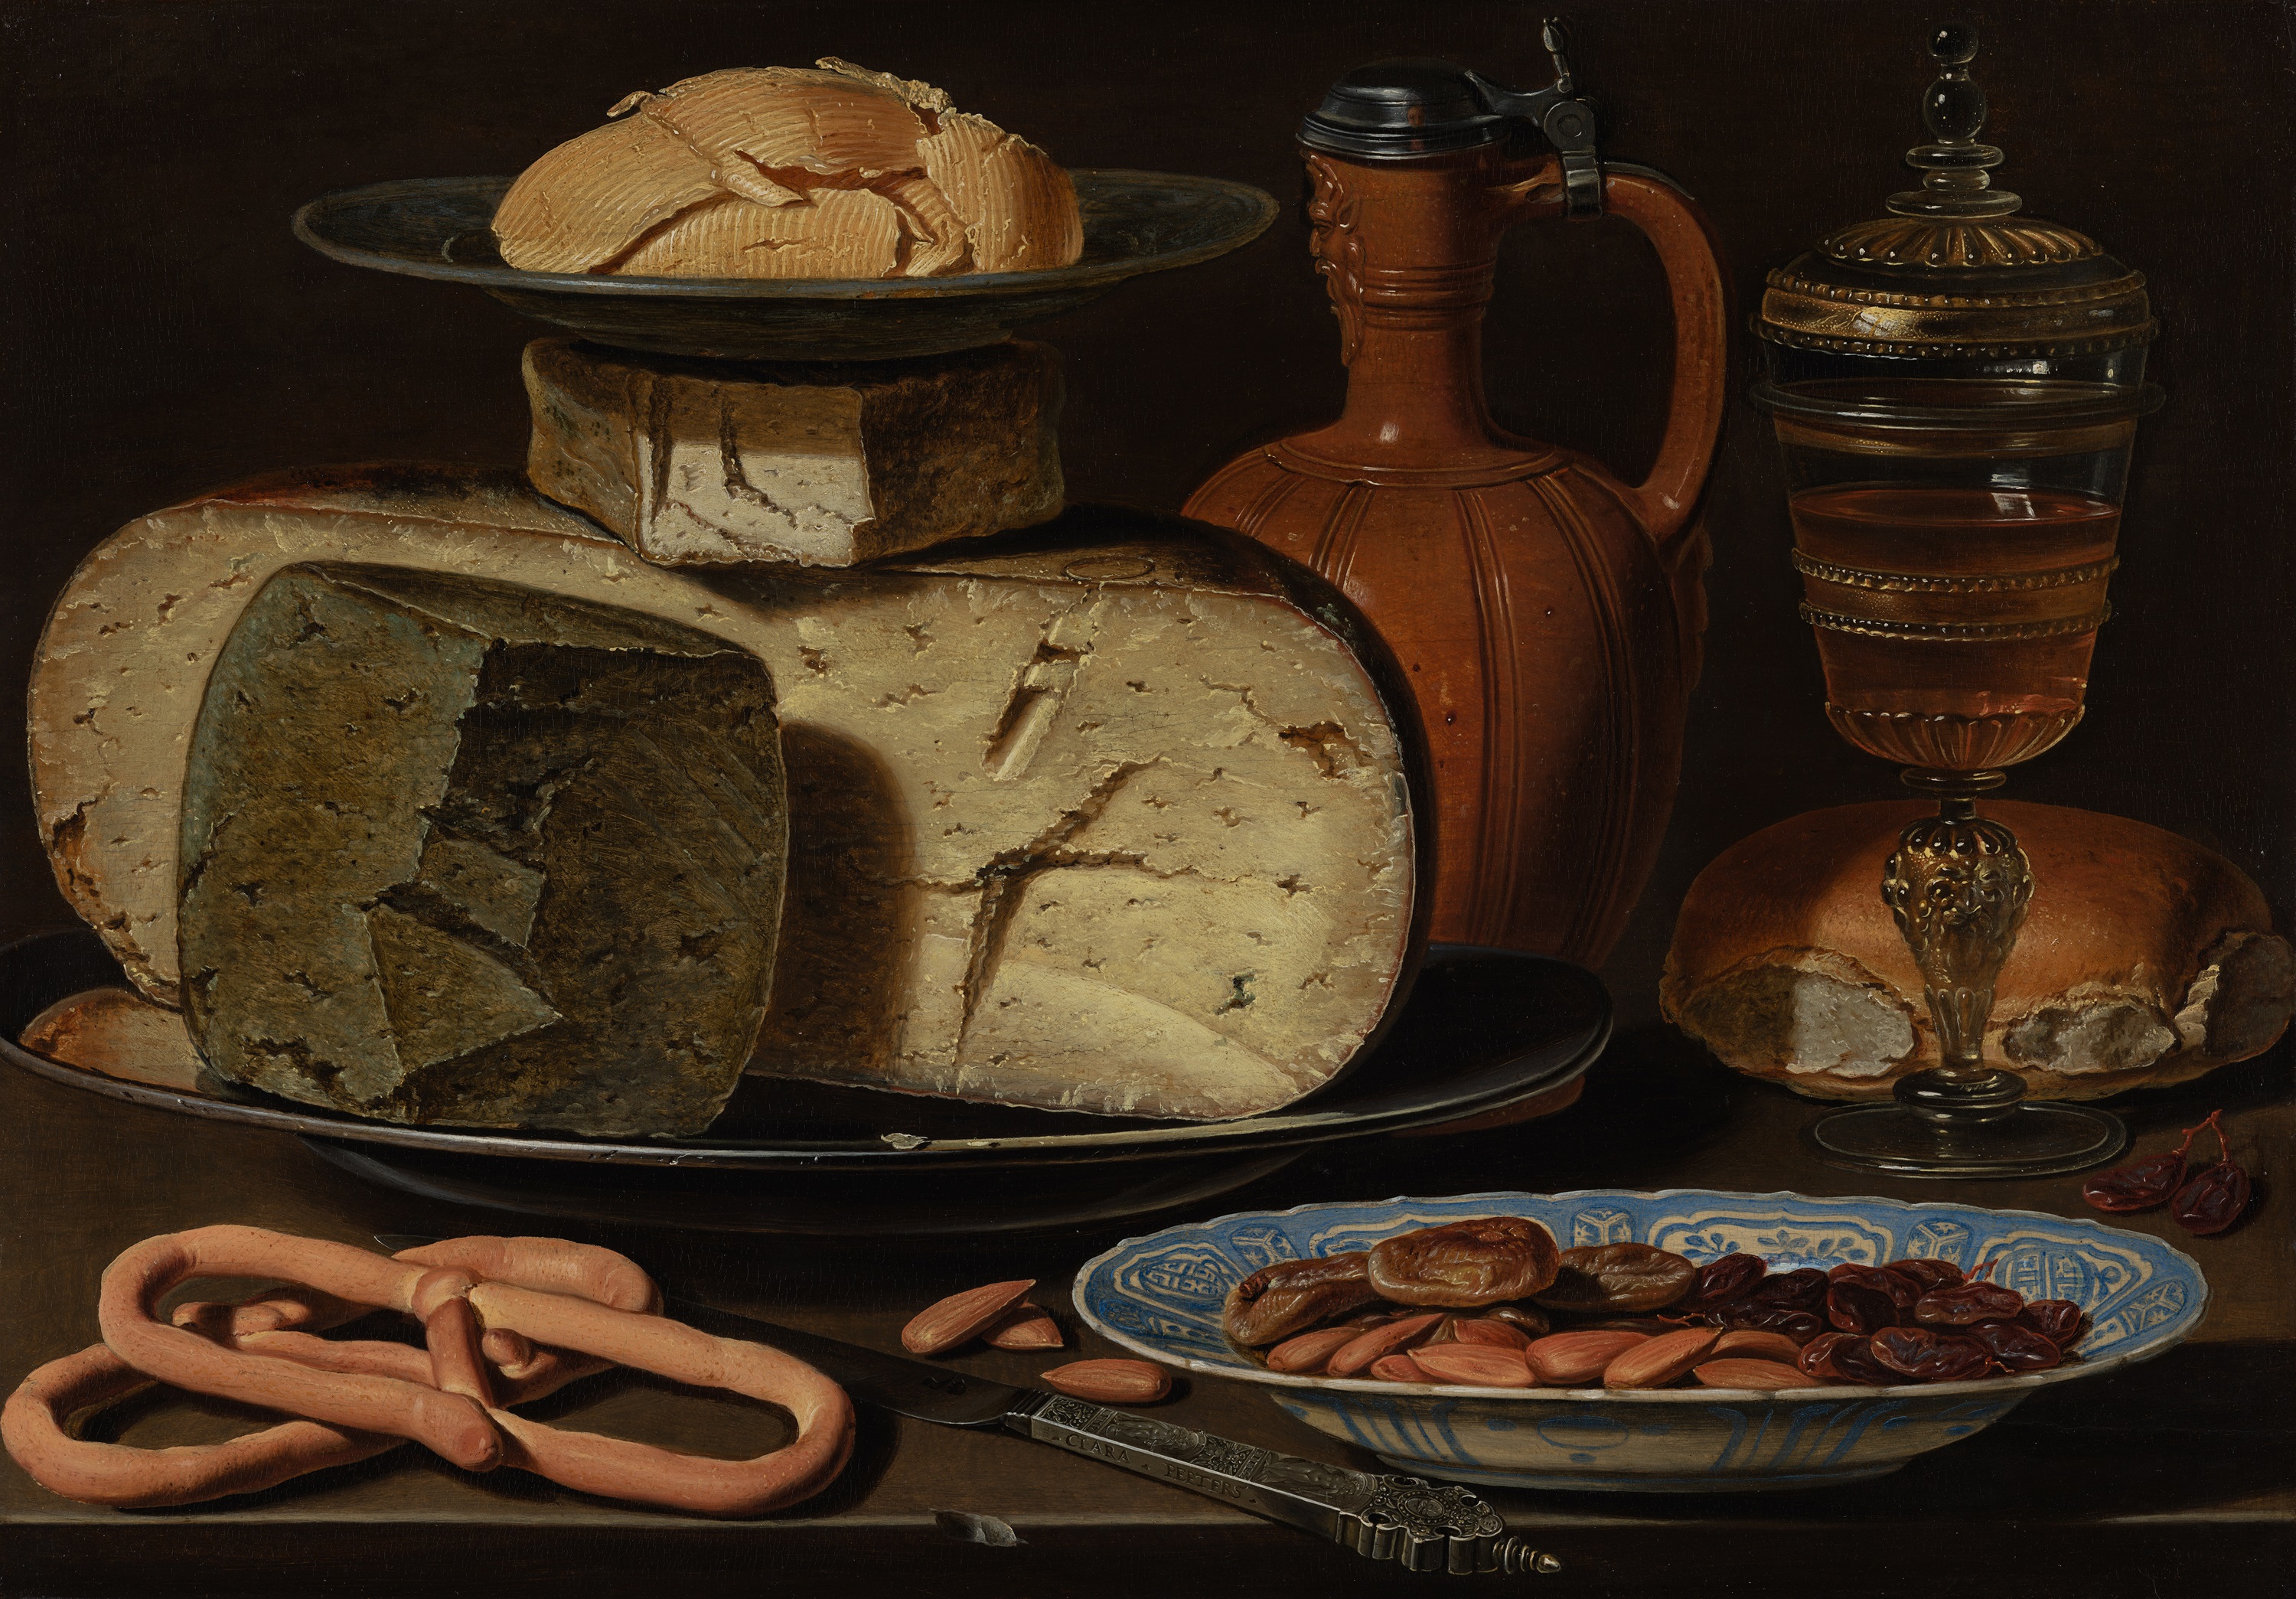 Still Life with Cheeses, Almonds and Pretzels by Clara Peeters - c. 1615 - 35 x 50 cm Mauritshuis, The Hague